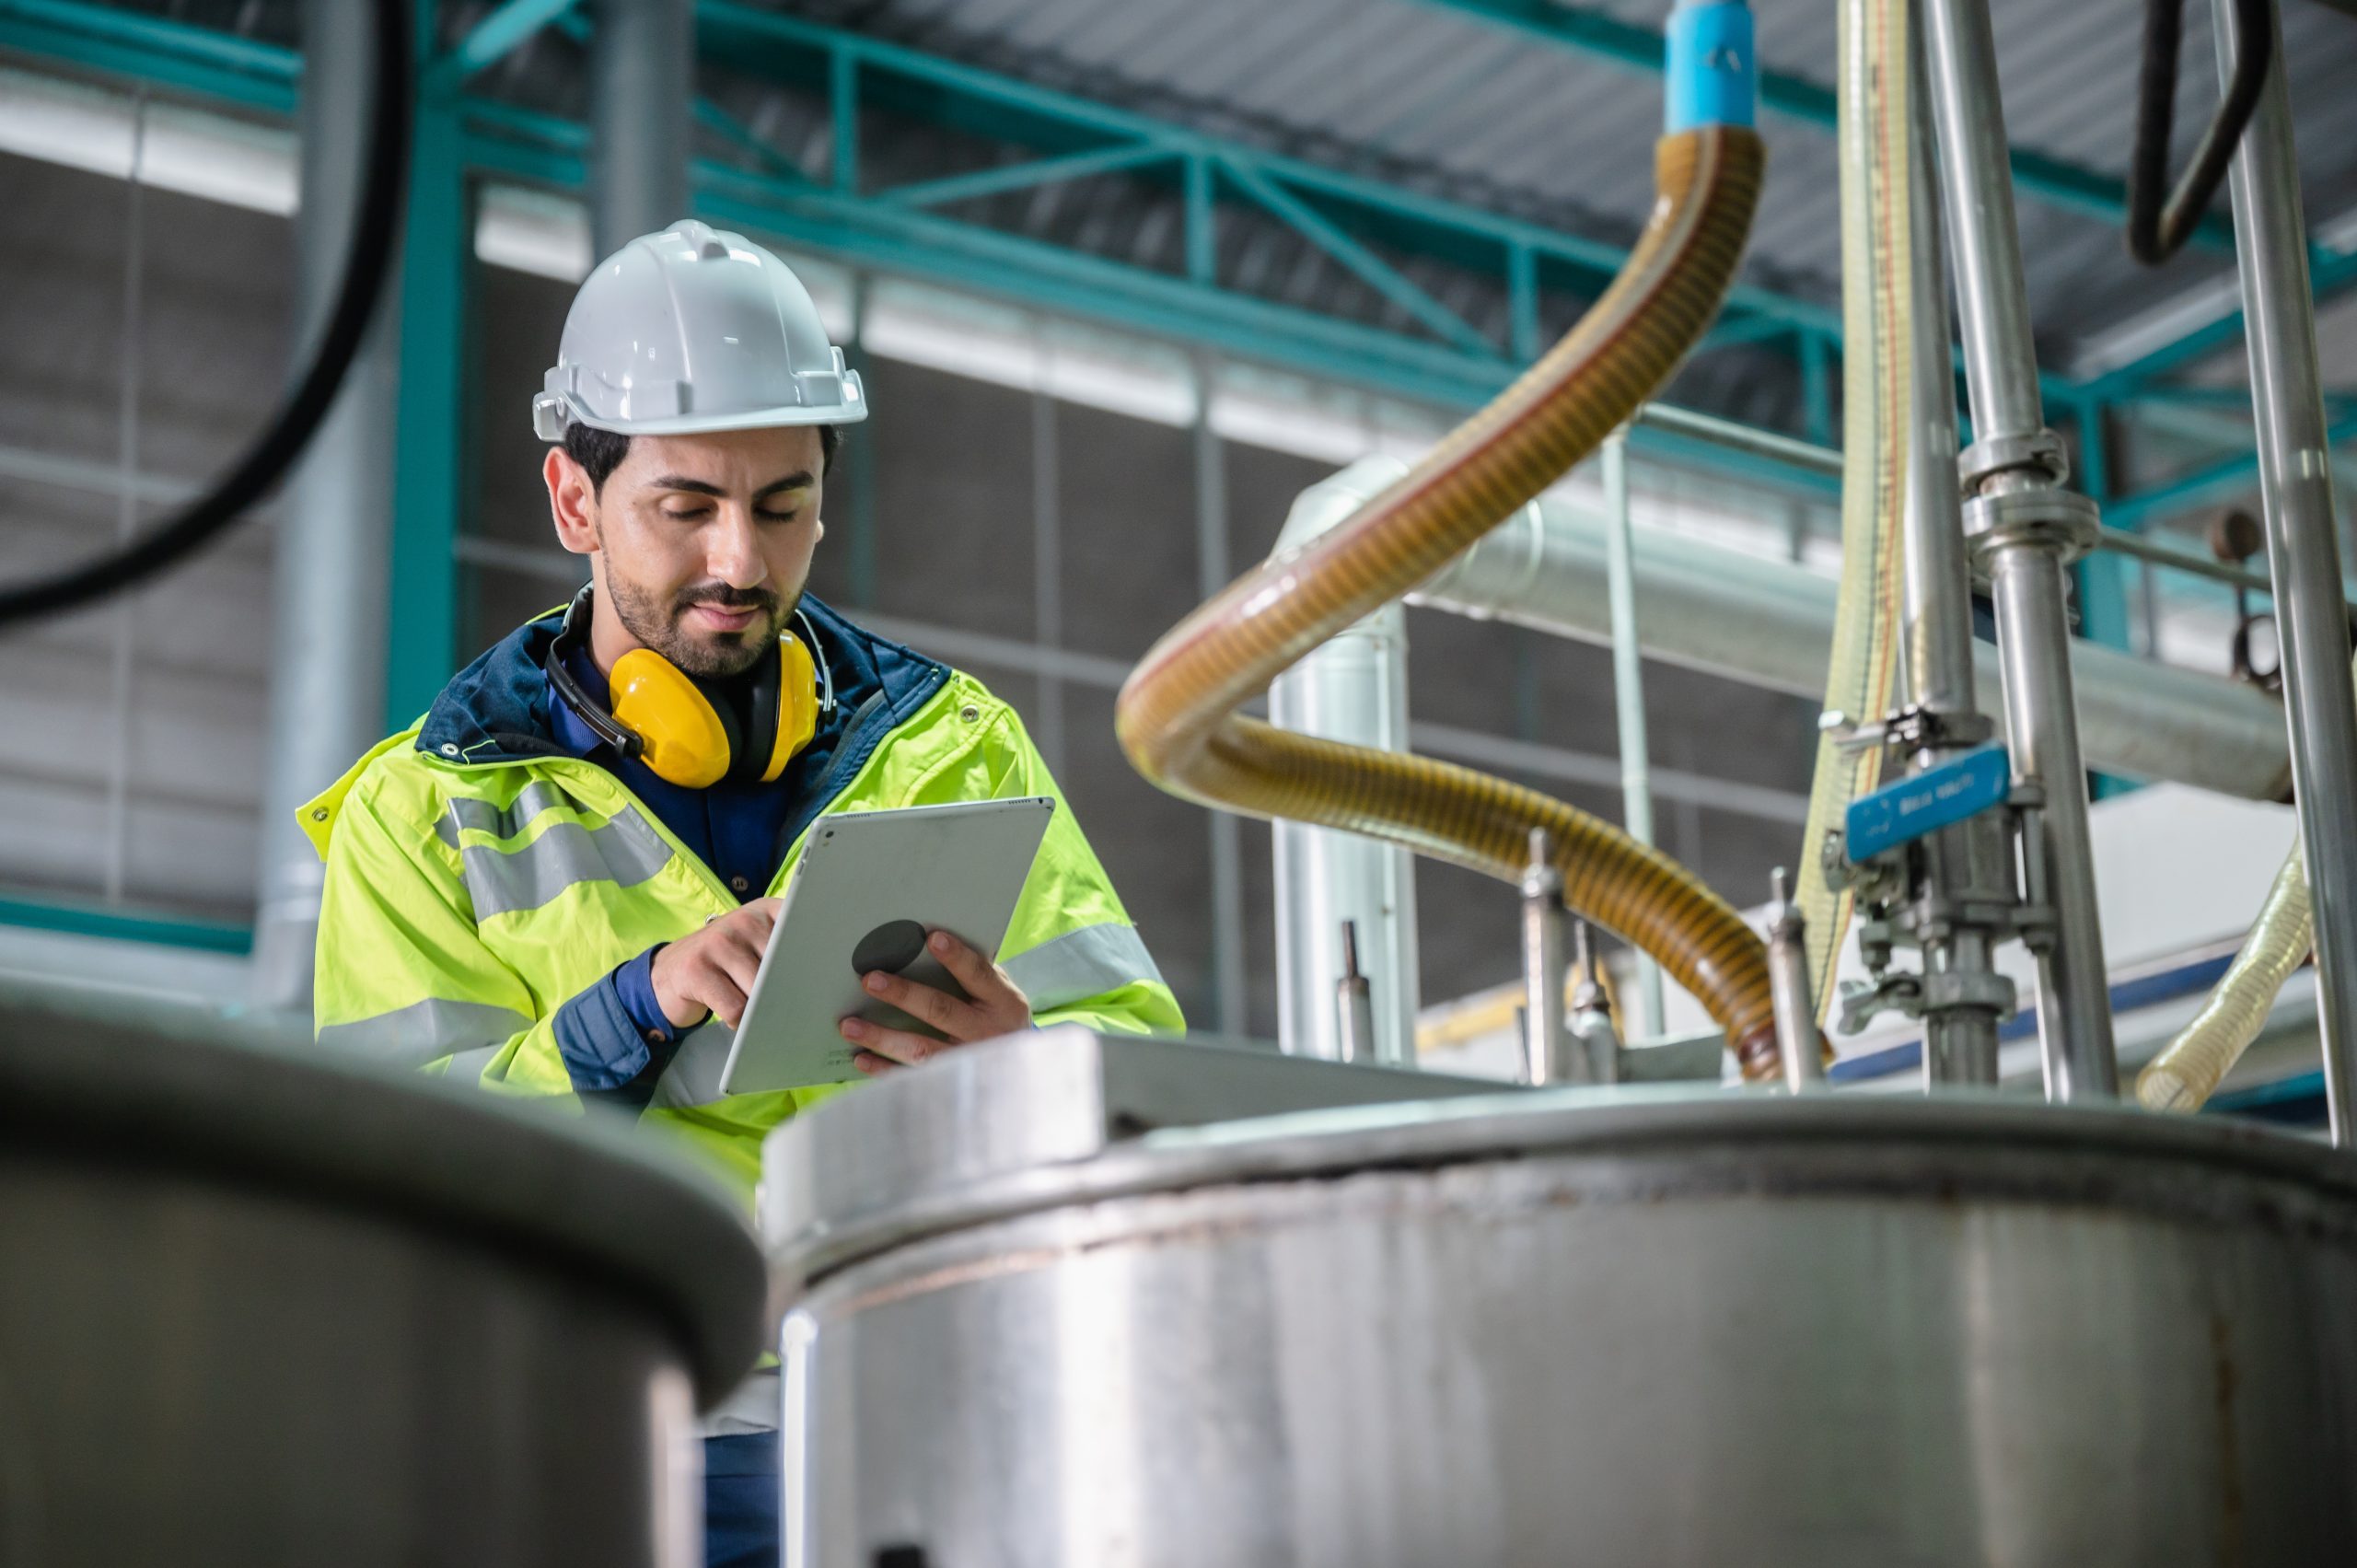 A man in a hard hat checks a tablet at a beverage manufacturing facility